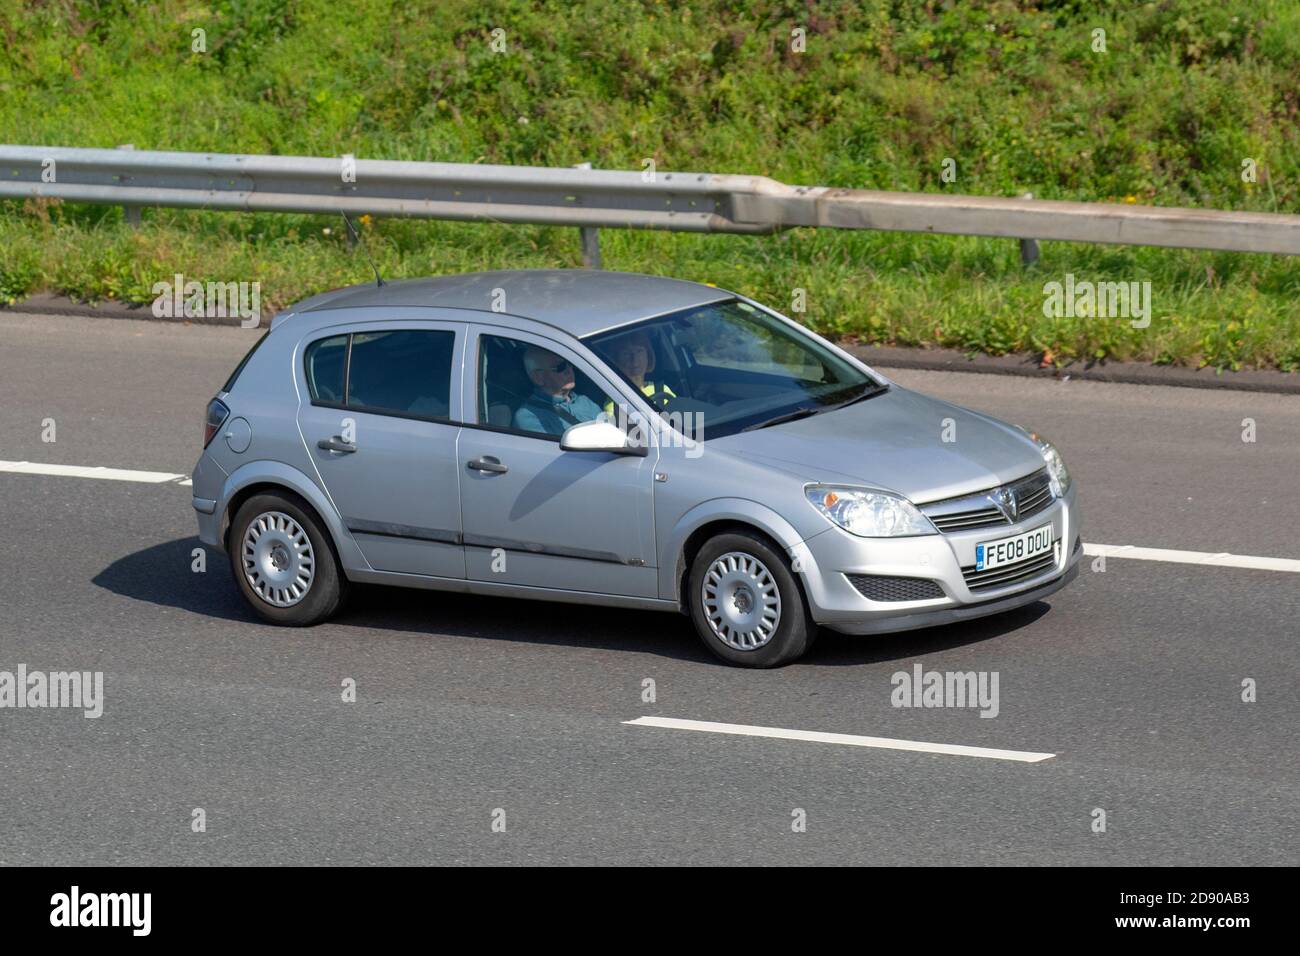 2008 08 silver Vauxhall Astra Life A/C A; Vehicular traffic, moving vehicles, cars, vehicle driving on UK roads, motors, motoring on the M6 motorway highway UK road network. Stock Photo